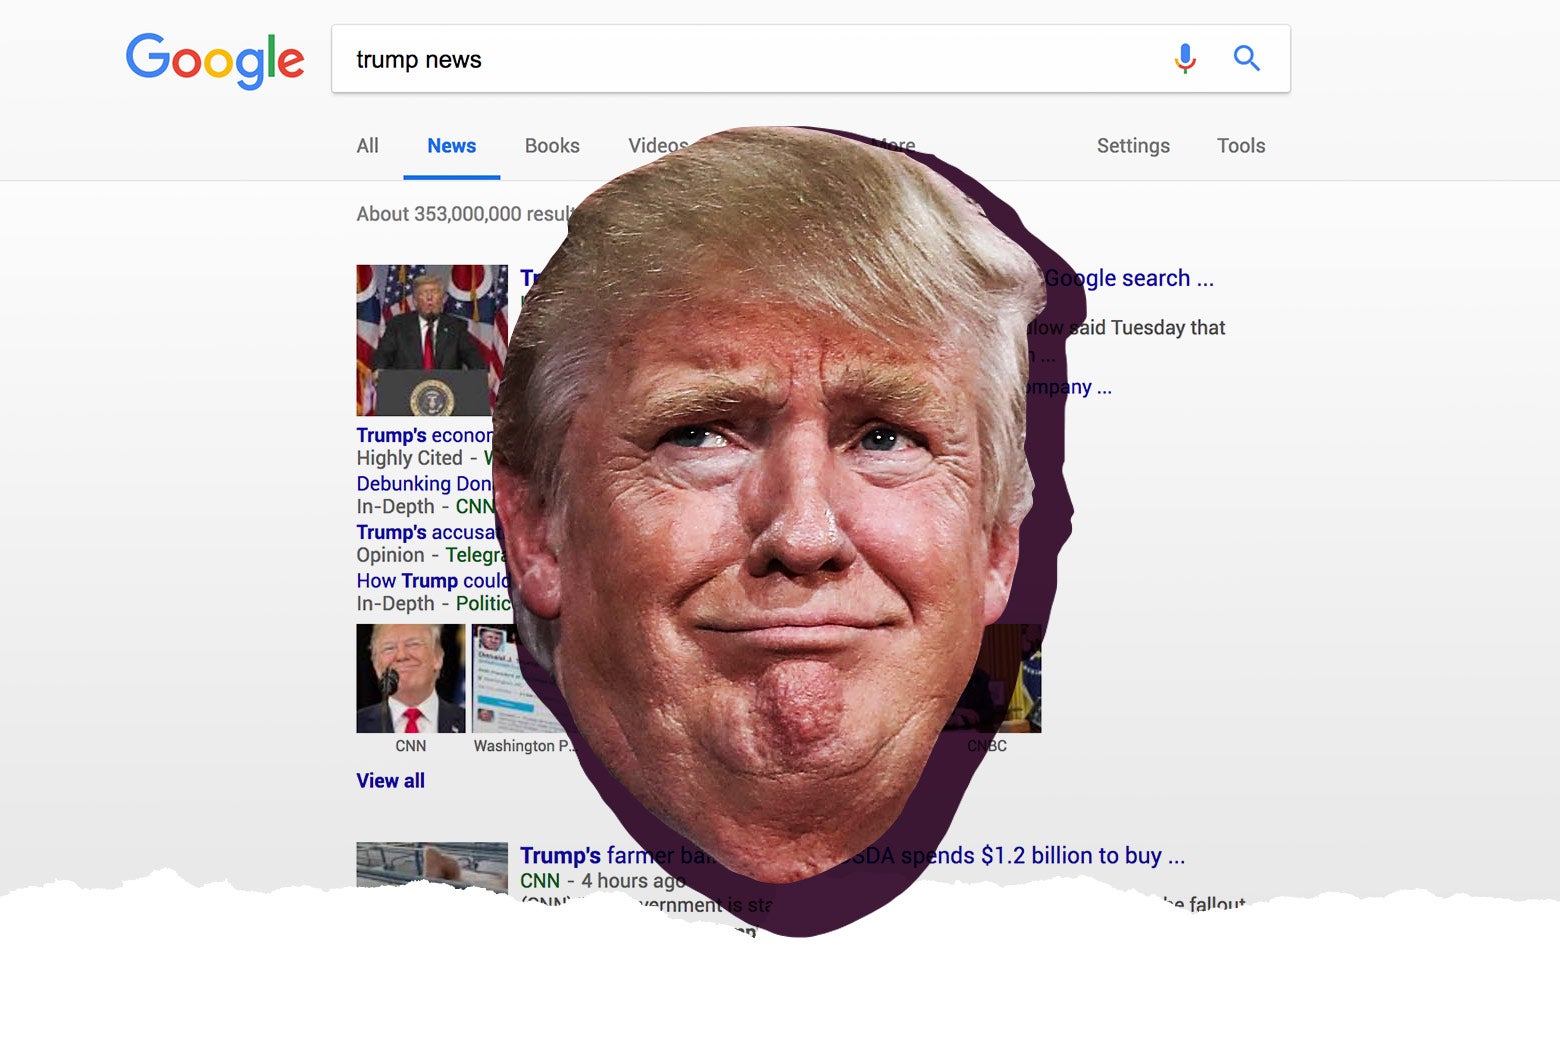 Photo illustration: Trump's face overlaid on Google search results for "Trump news."